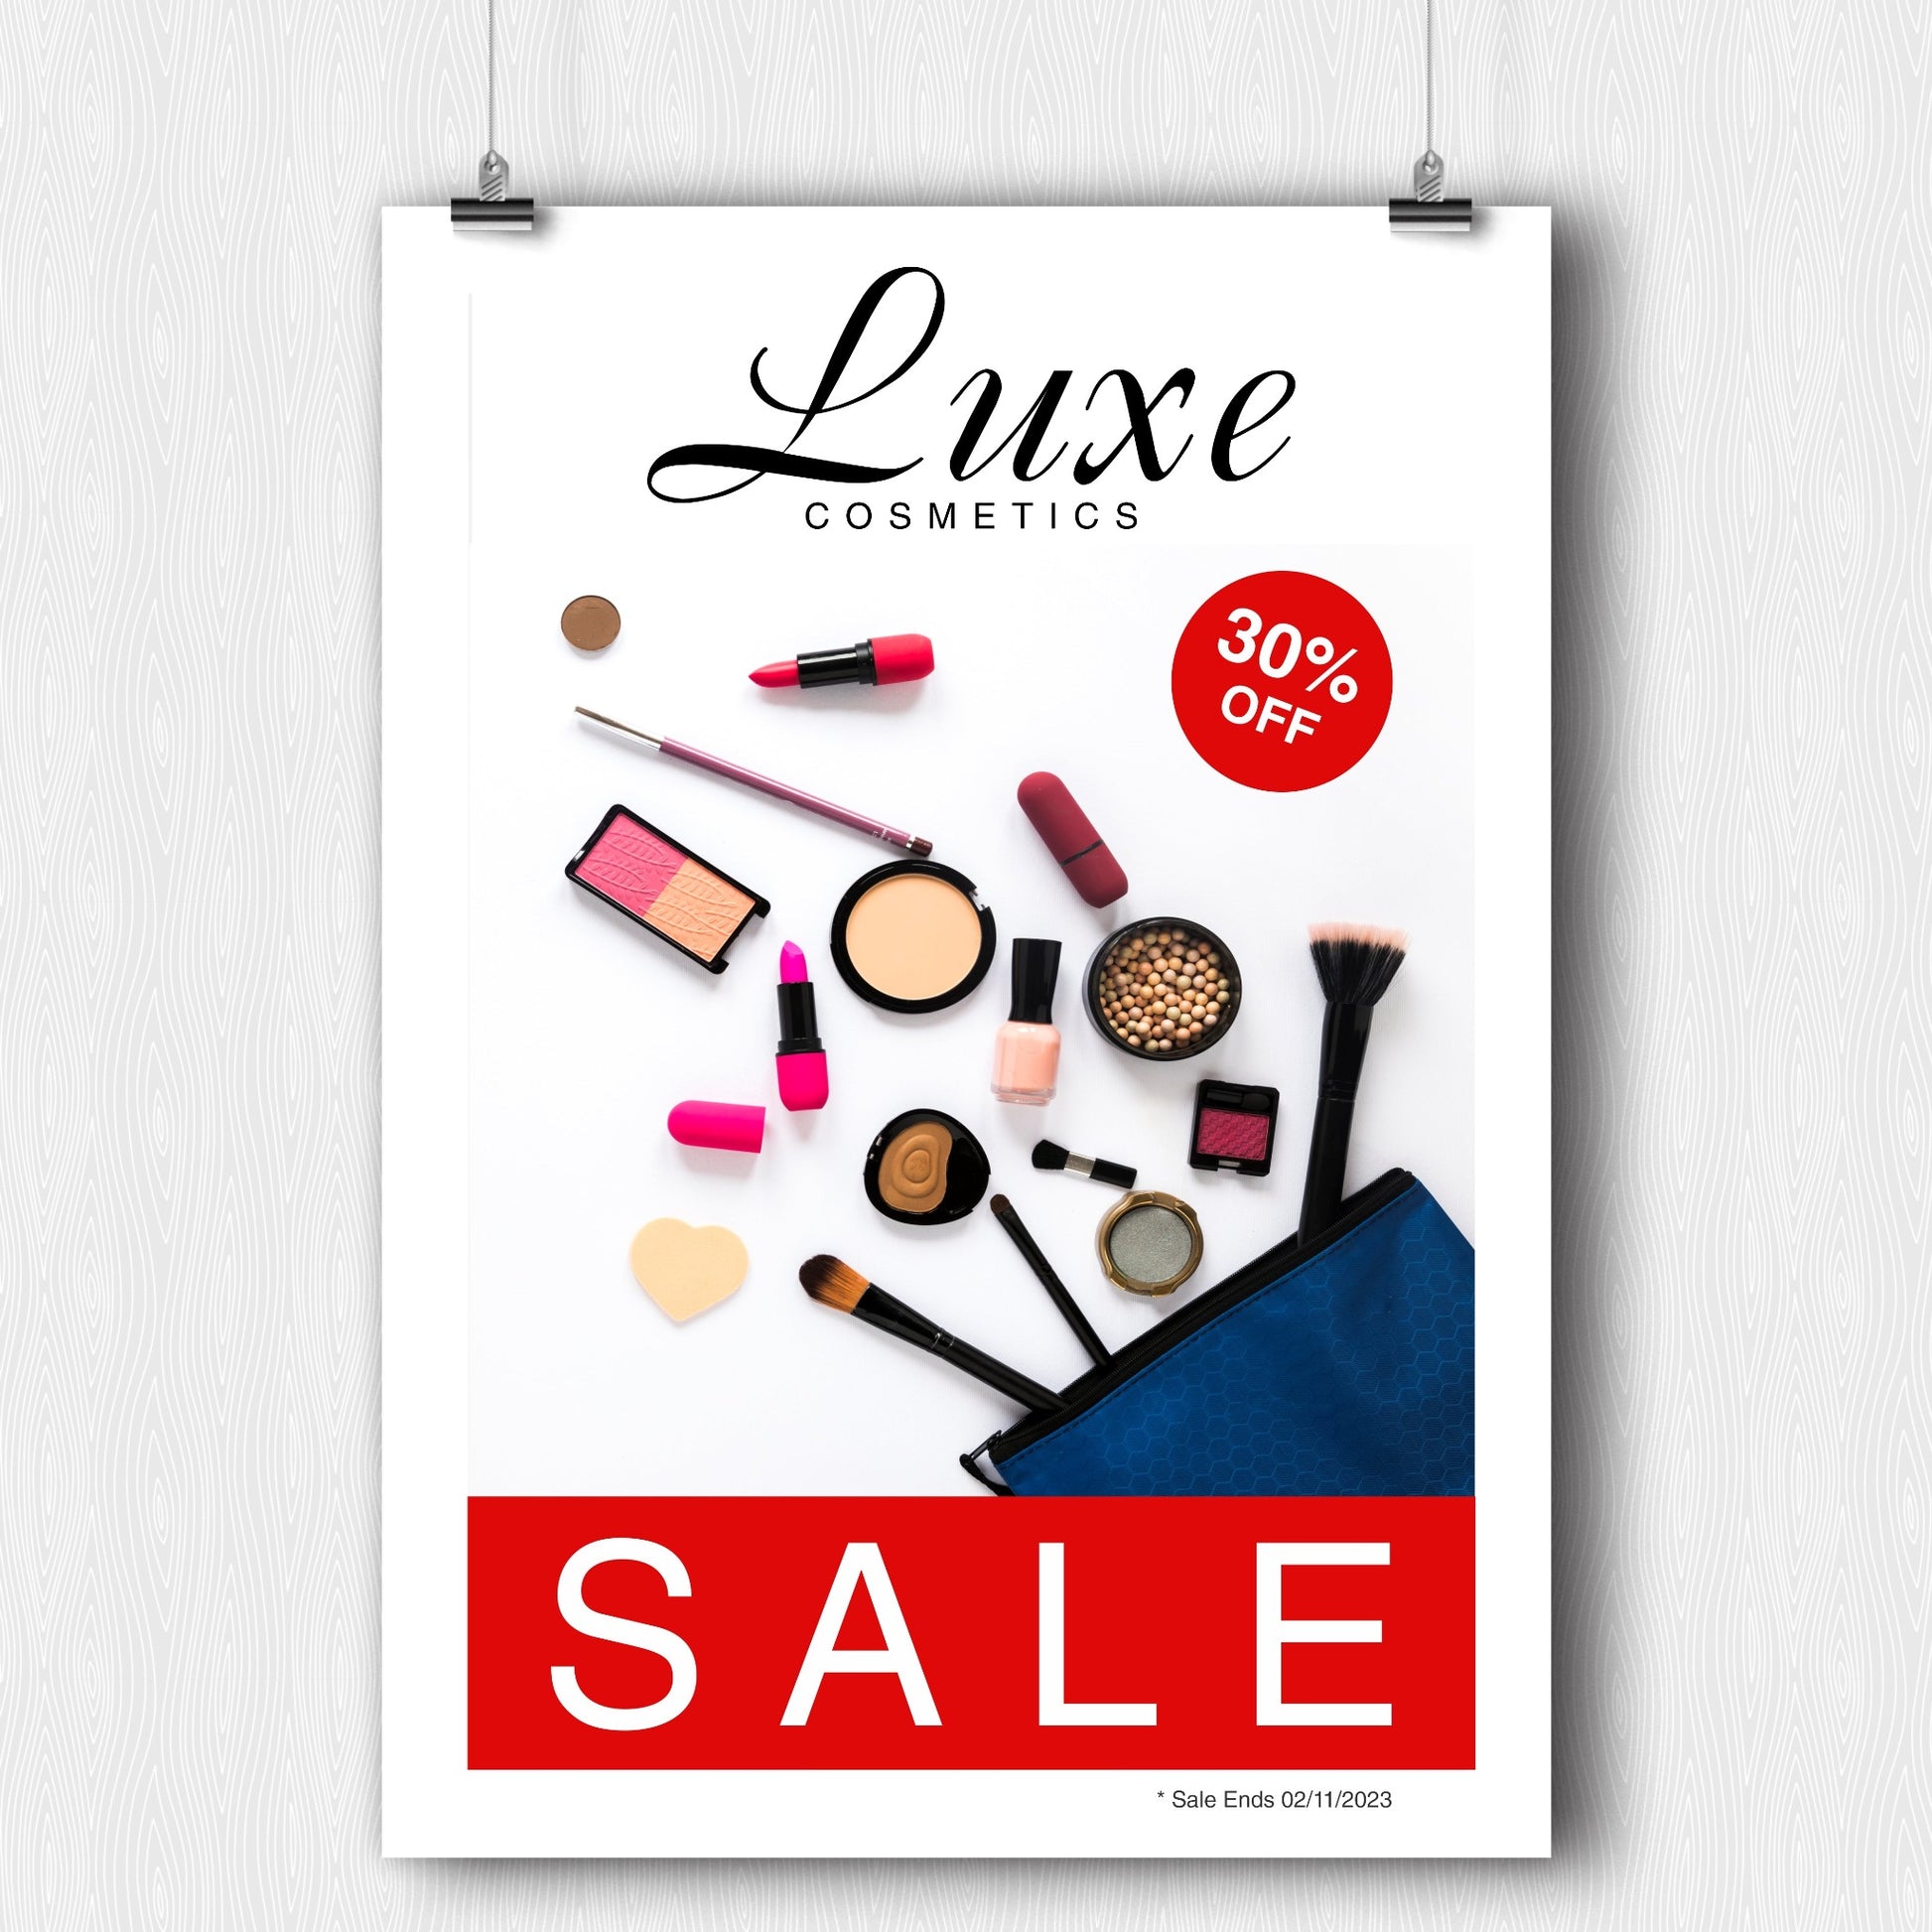 A photograph of a glossy advertising poster advertising a cosmetics sale